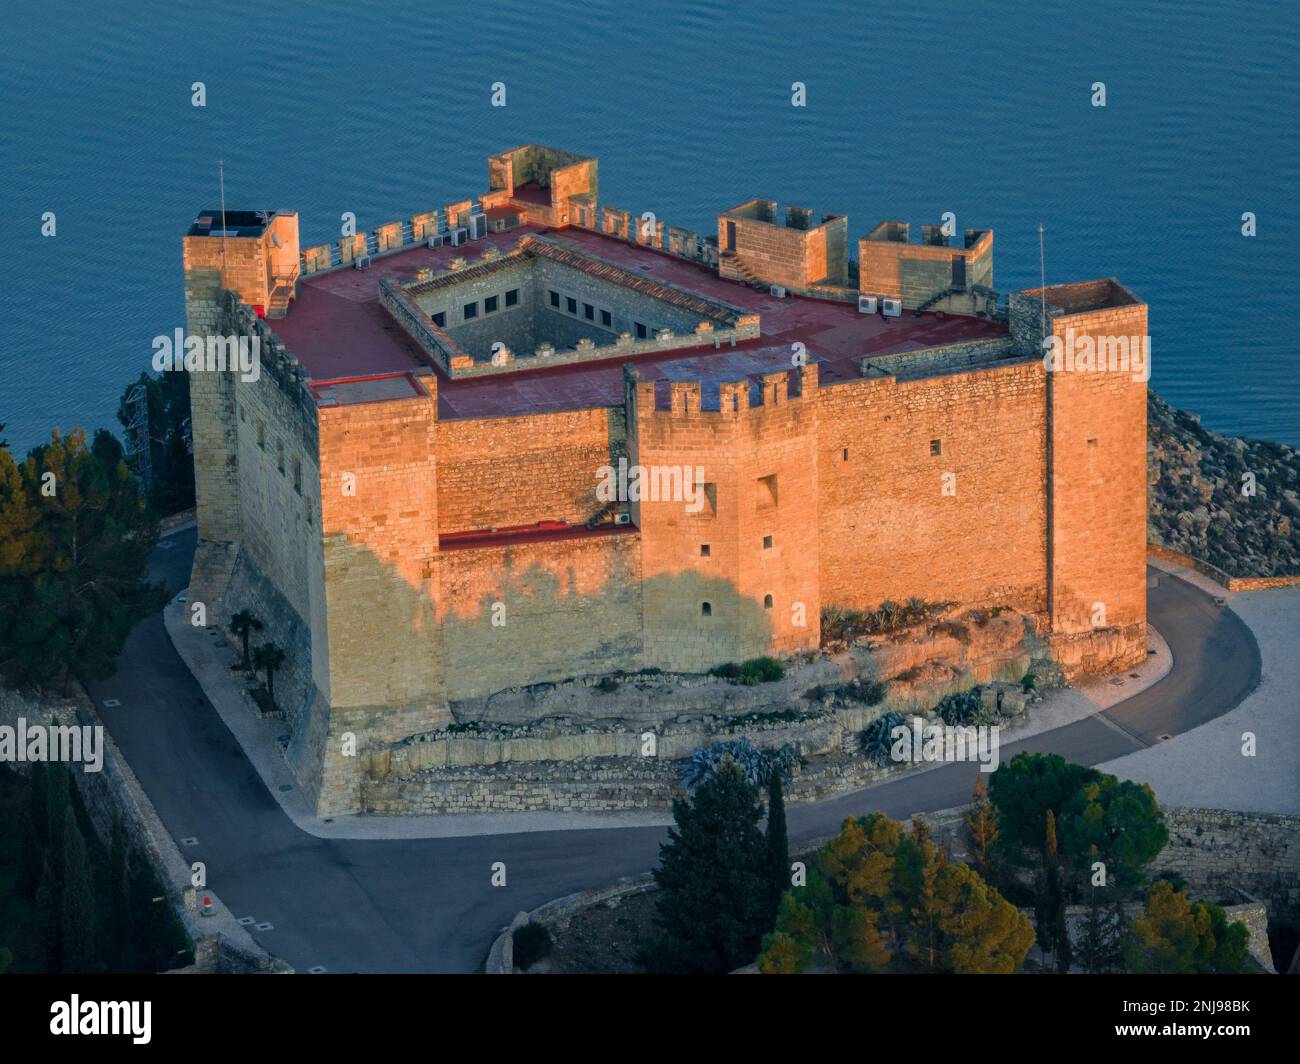 Aerial view of the castle of Mequinenza at the confluence of the Segre and Ebro rivers in a winter sunset (Bajo Cinca, Zaragoza, Aragon, Spain) Stock Photo